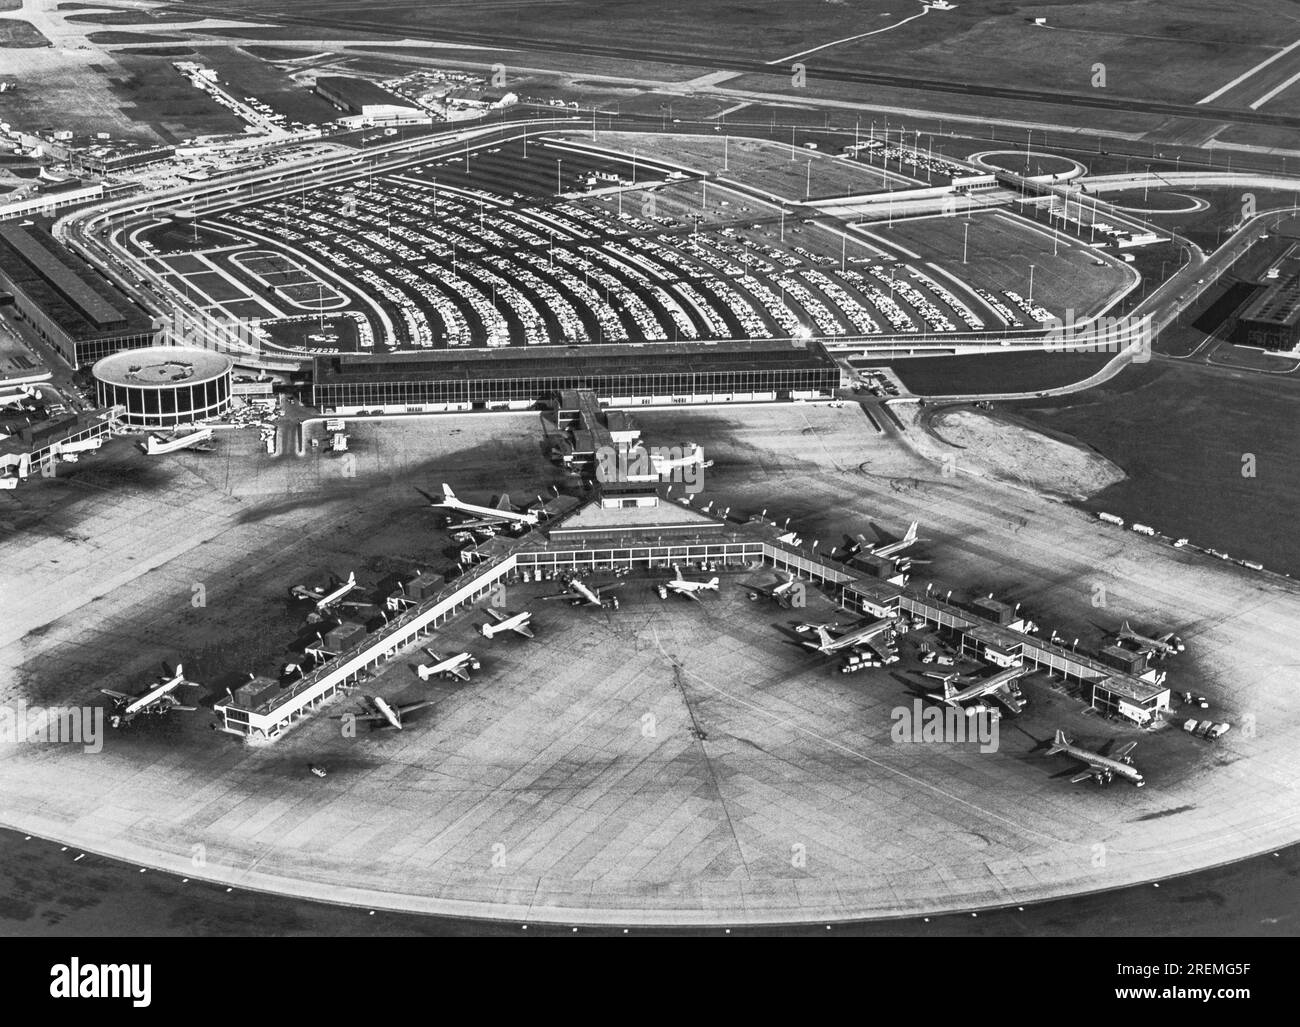 Chicago, Illinois: c. 1970 Luftaufnahme des American Airlines Terminals am O'Hare International Airport in Chicago. Stockfoto